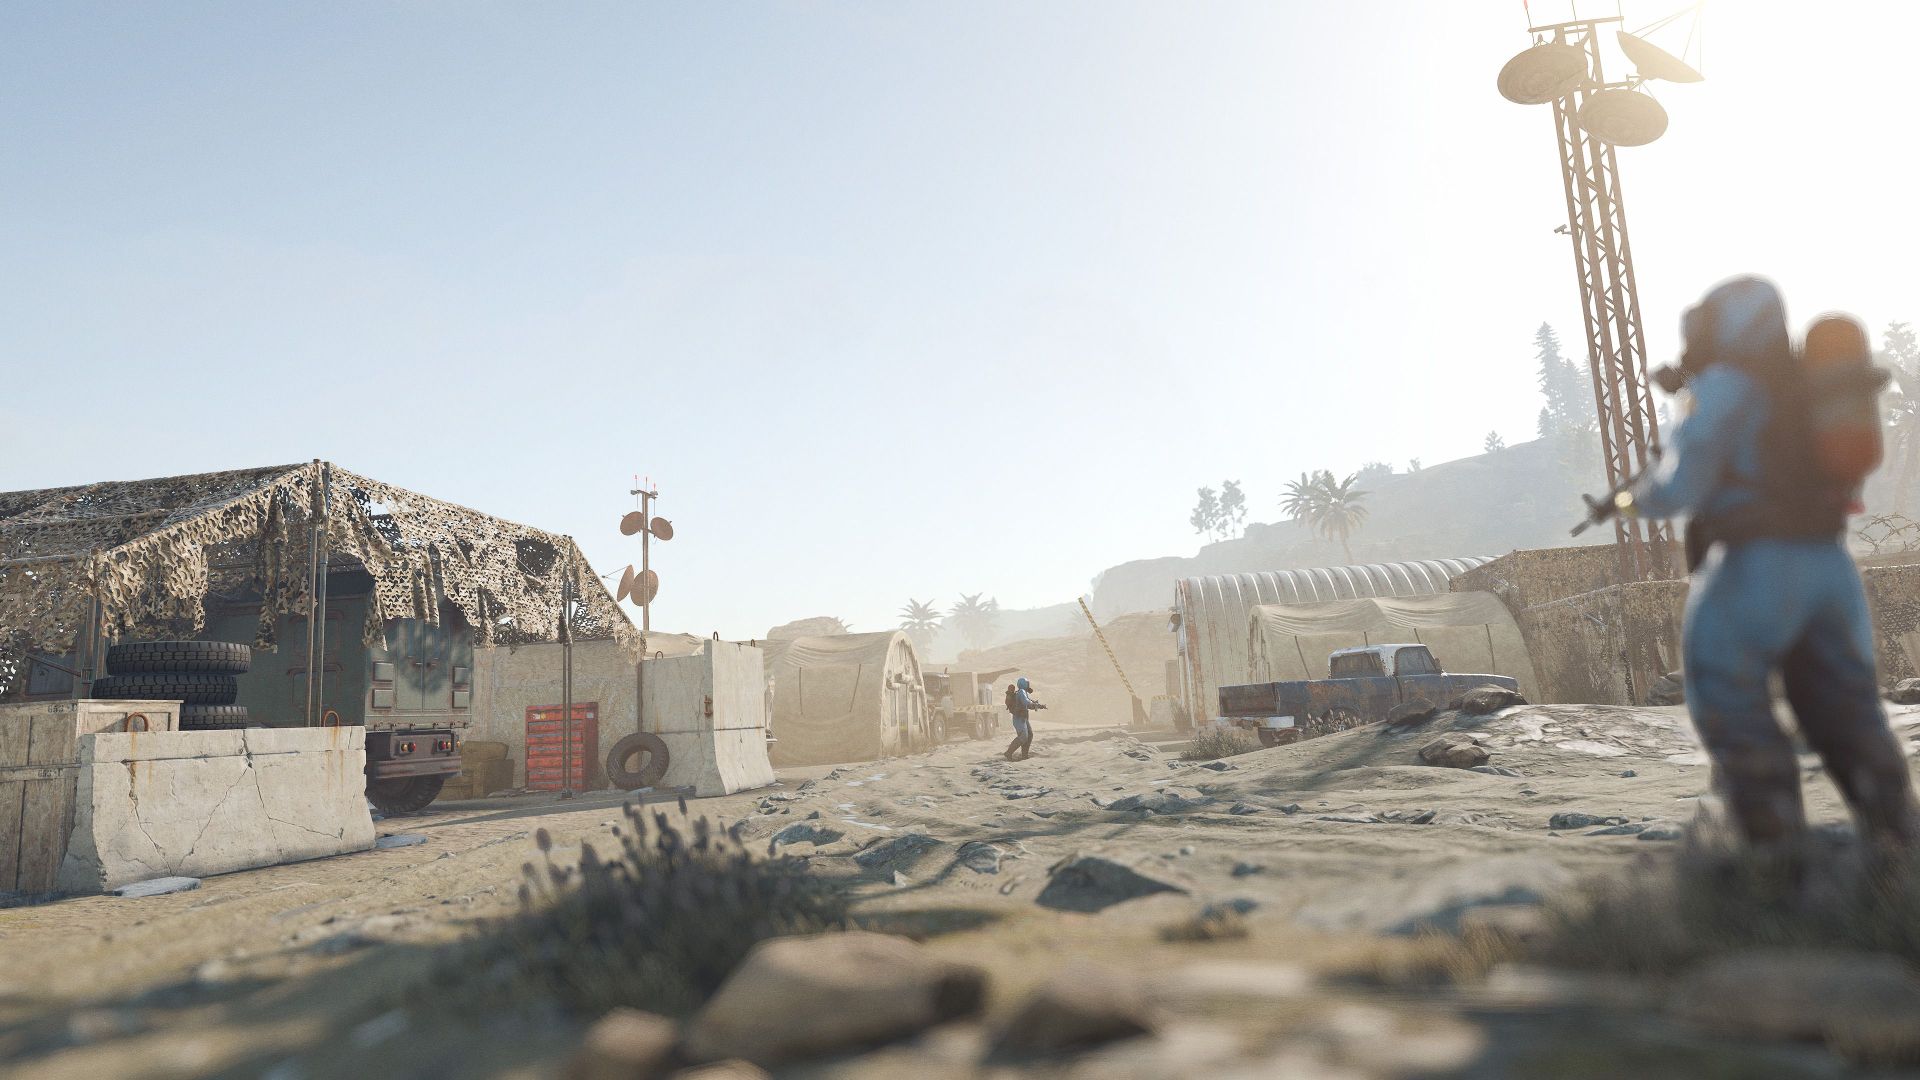 Rust’s November update brings desert bases and new rocket launching system